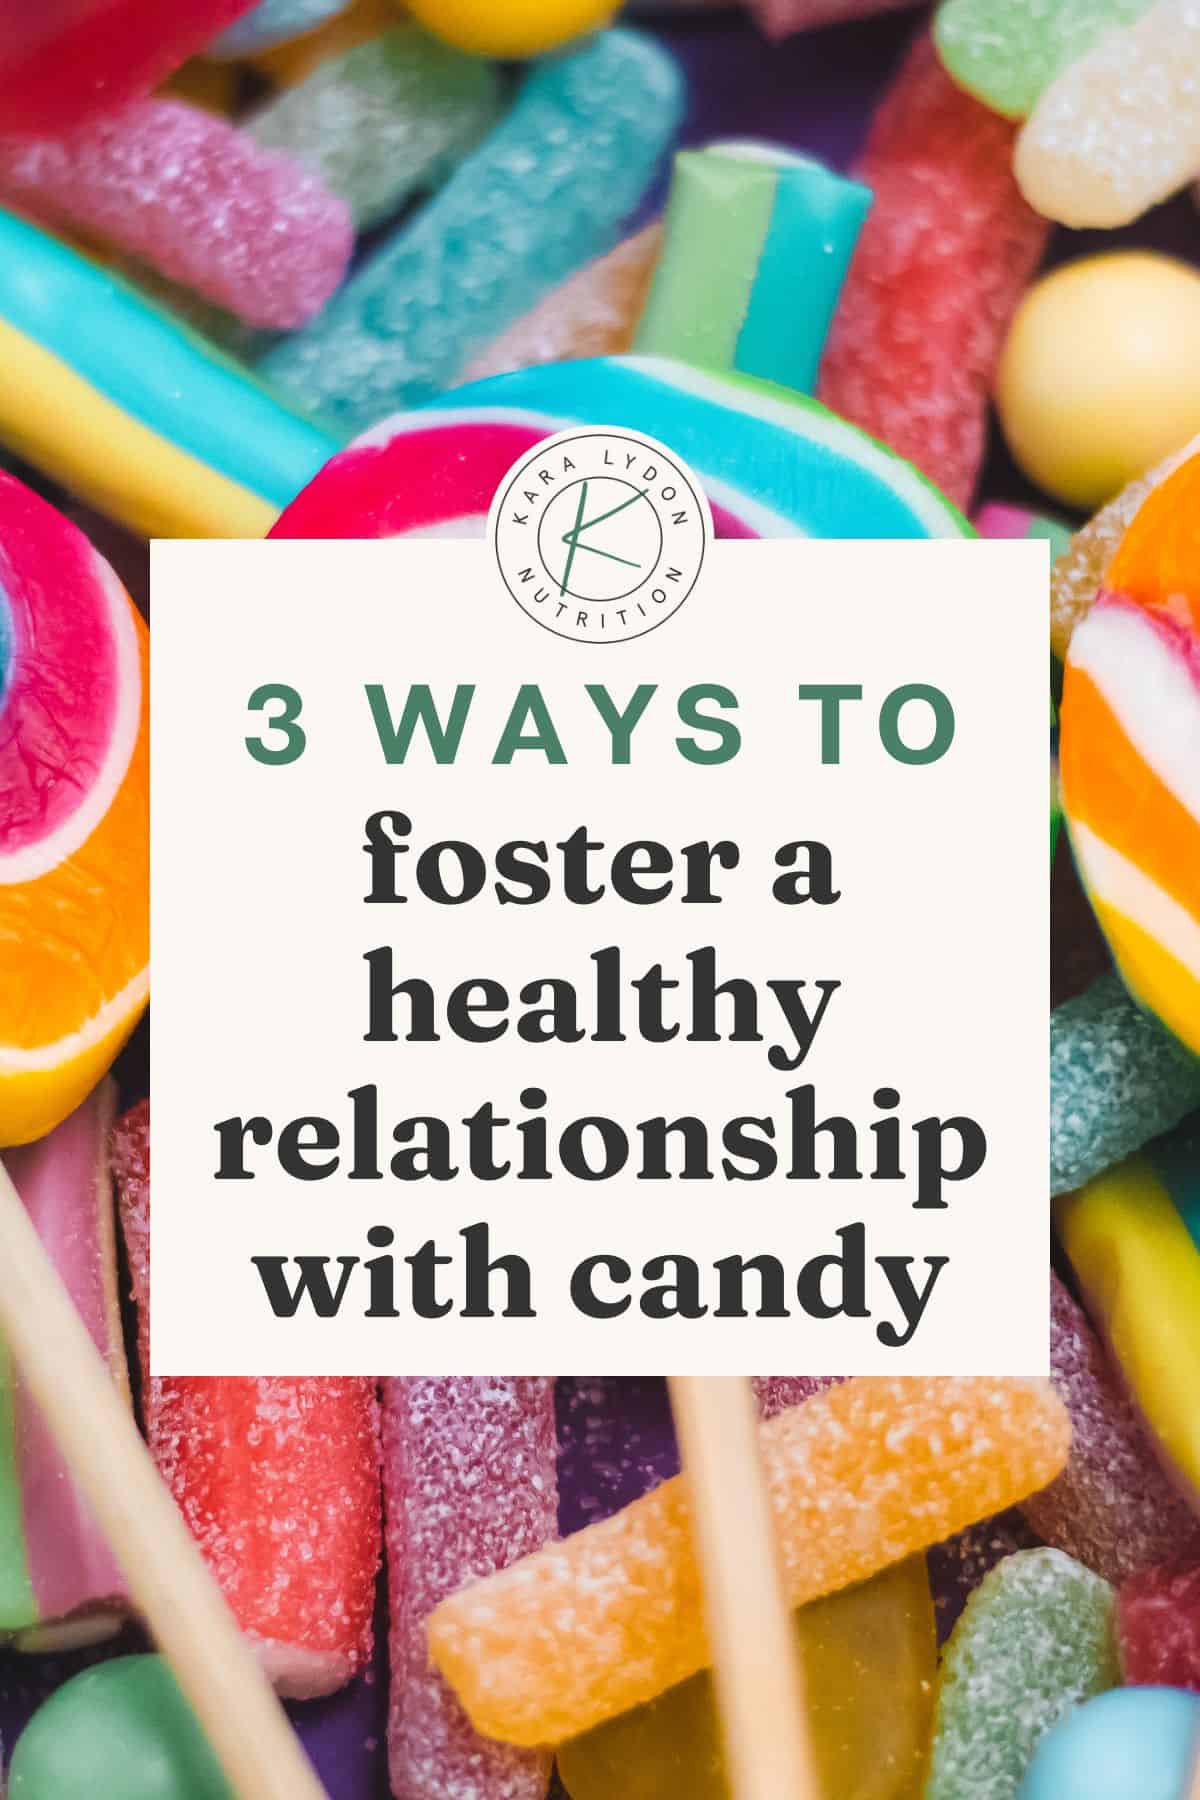 3 Ways to Foster a Healthy Relationship with Candy